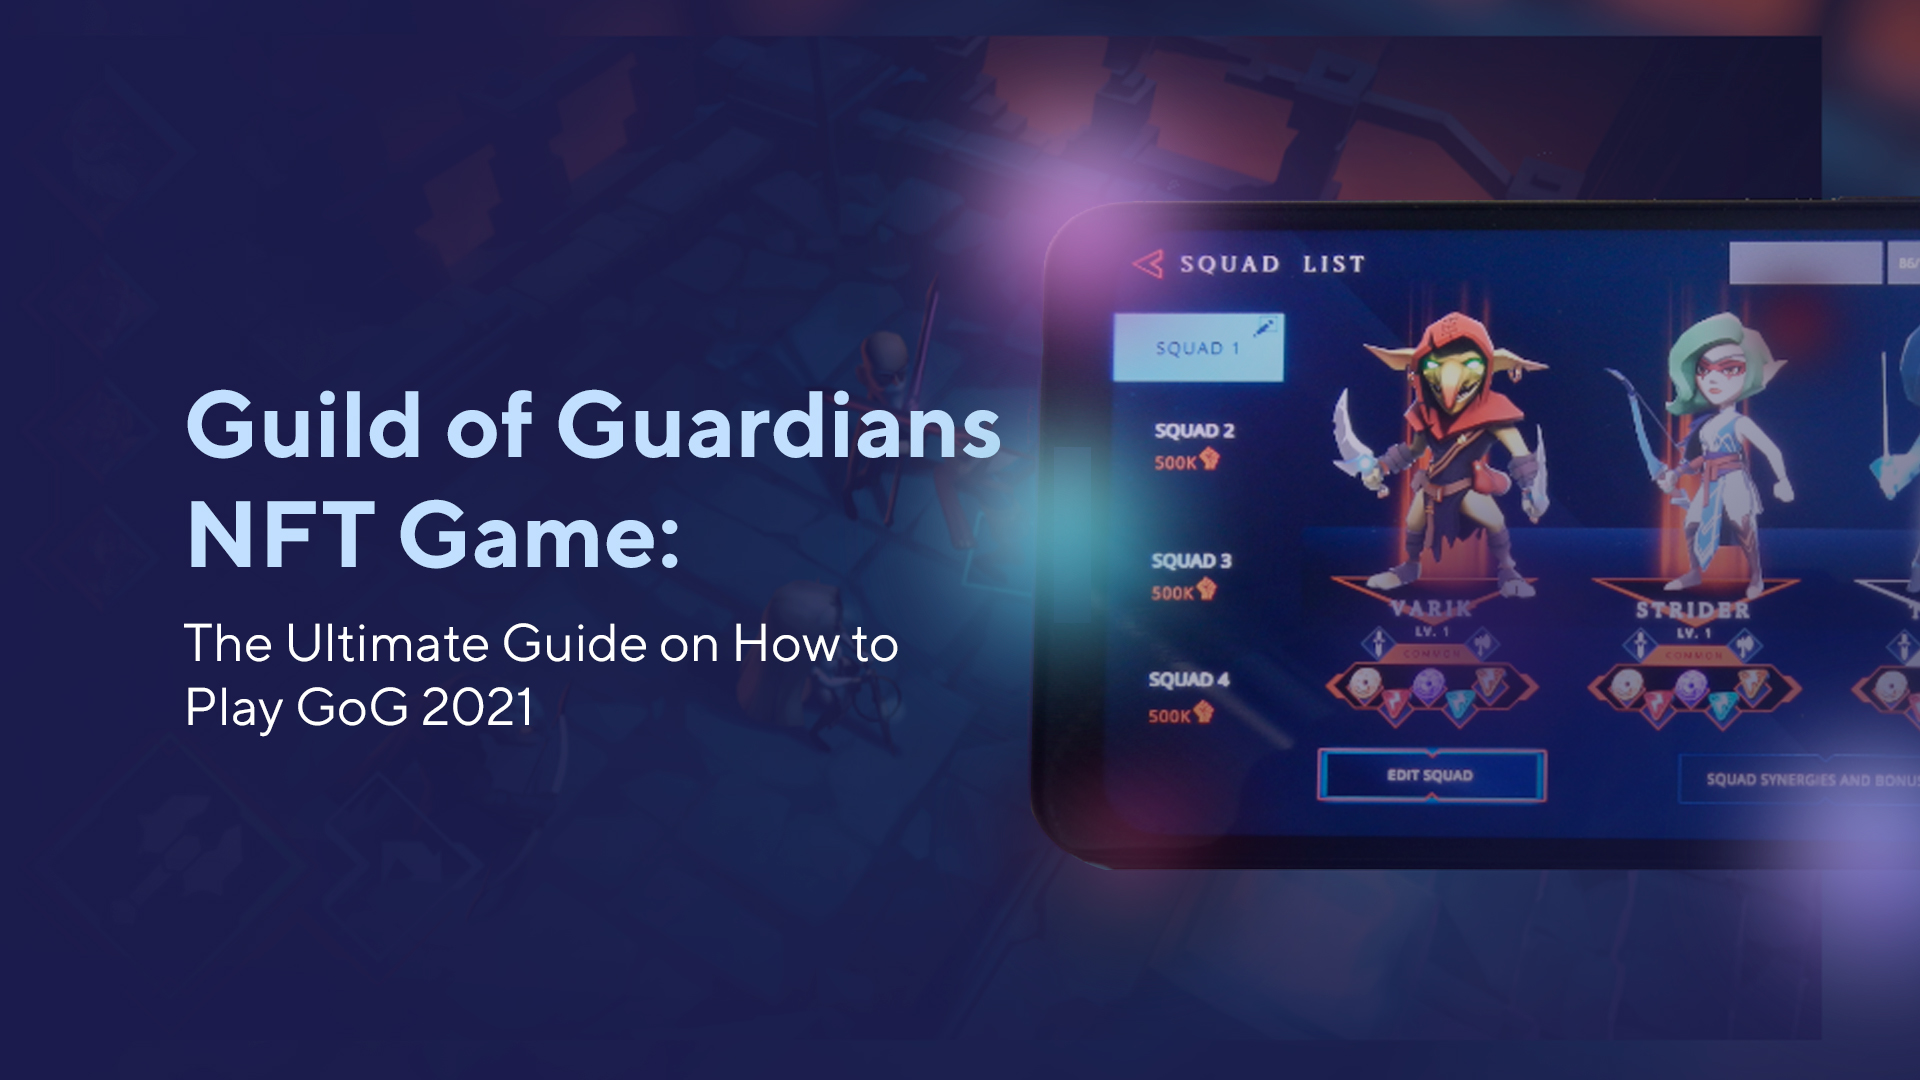 Guild of Guardians NFT Game: The Ultimate Guide on How to Play GoG 2021